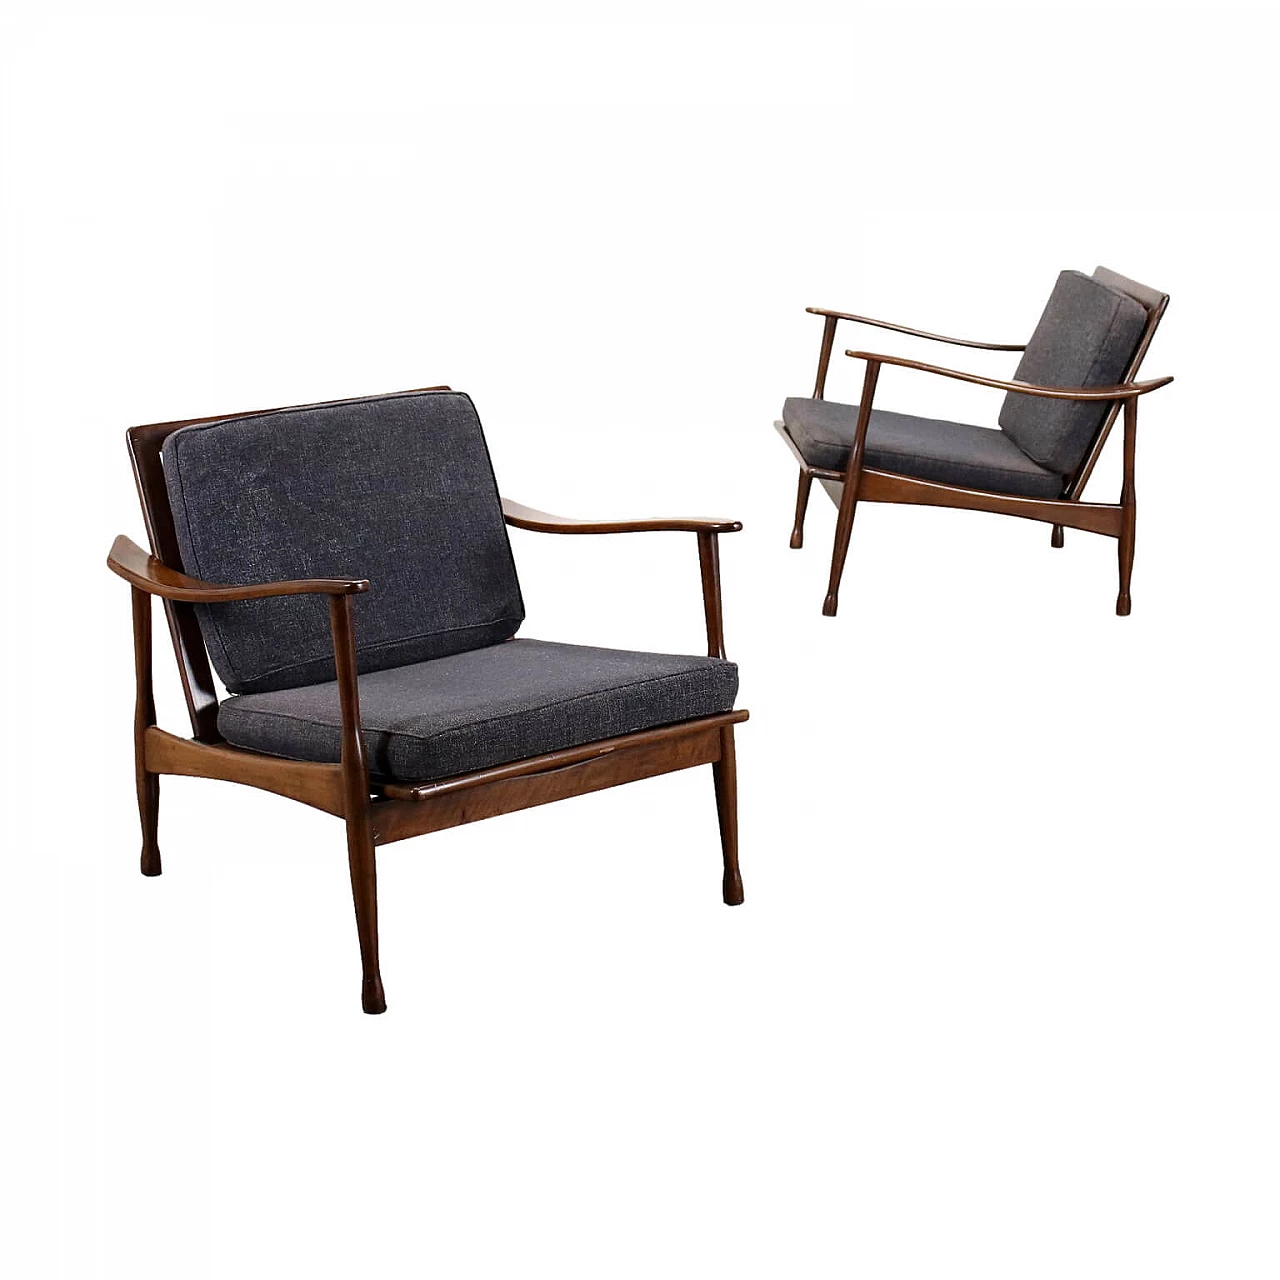 Pair of armchairs with wooden frame, 1950s 1463714